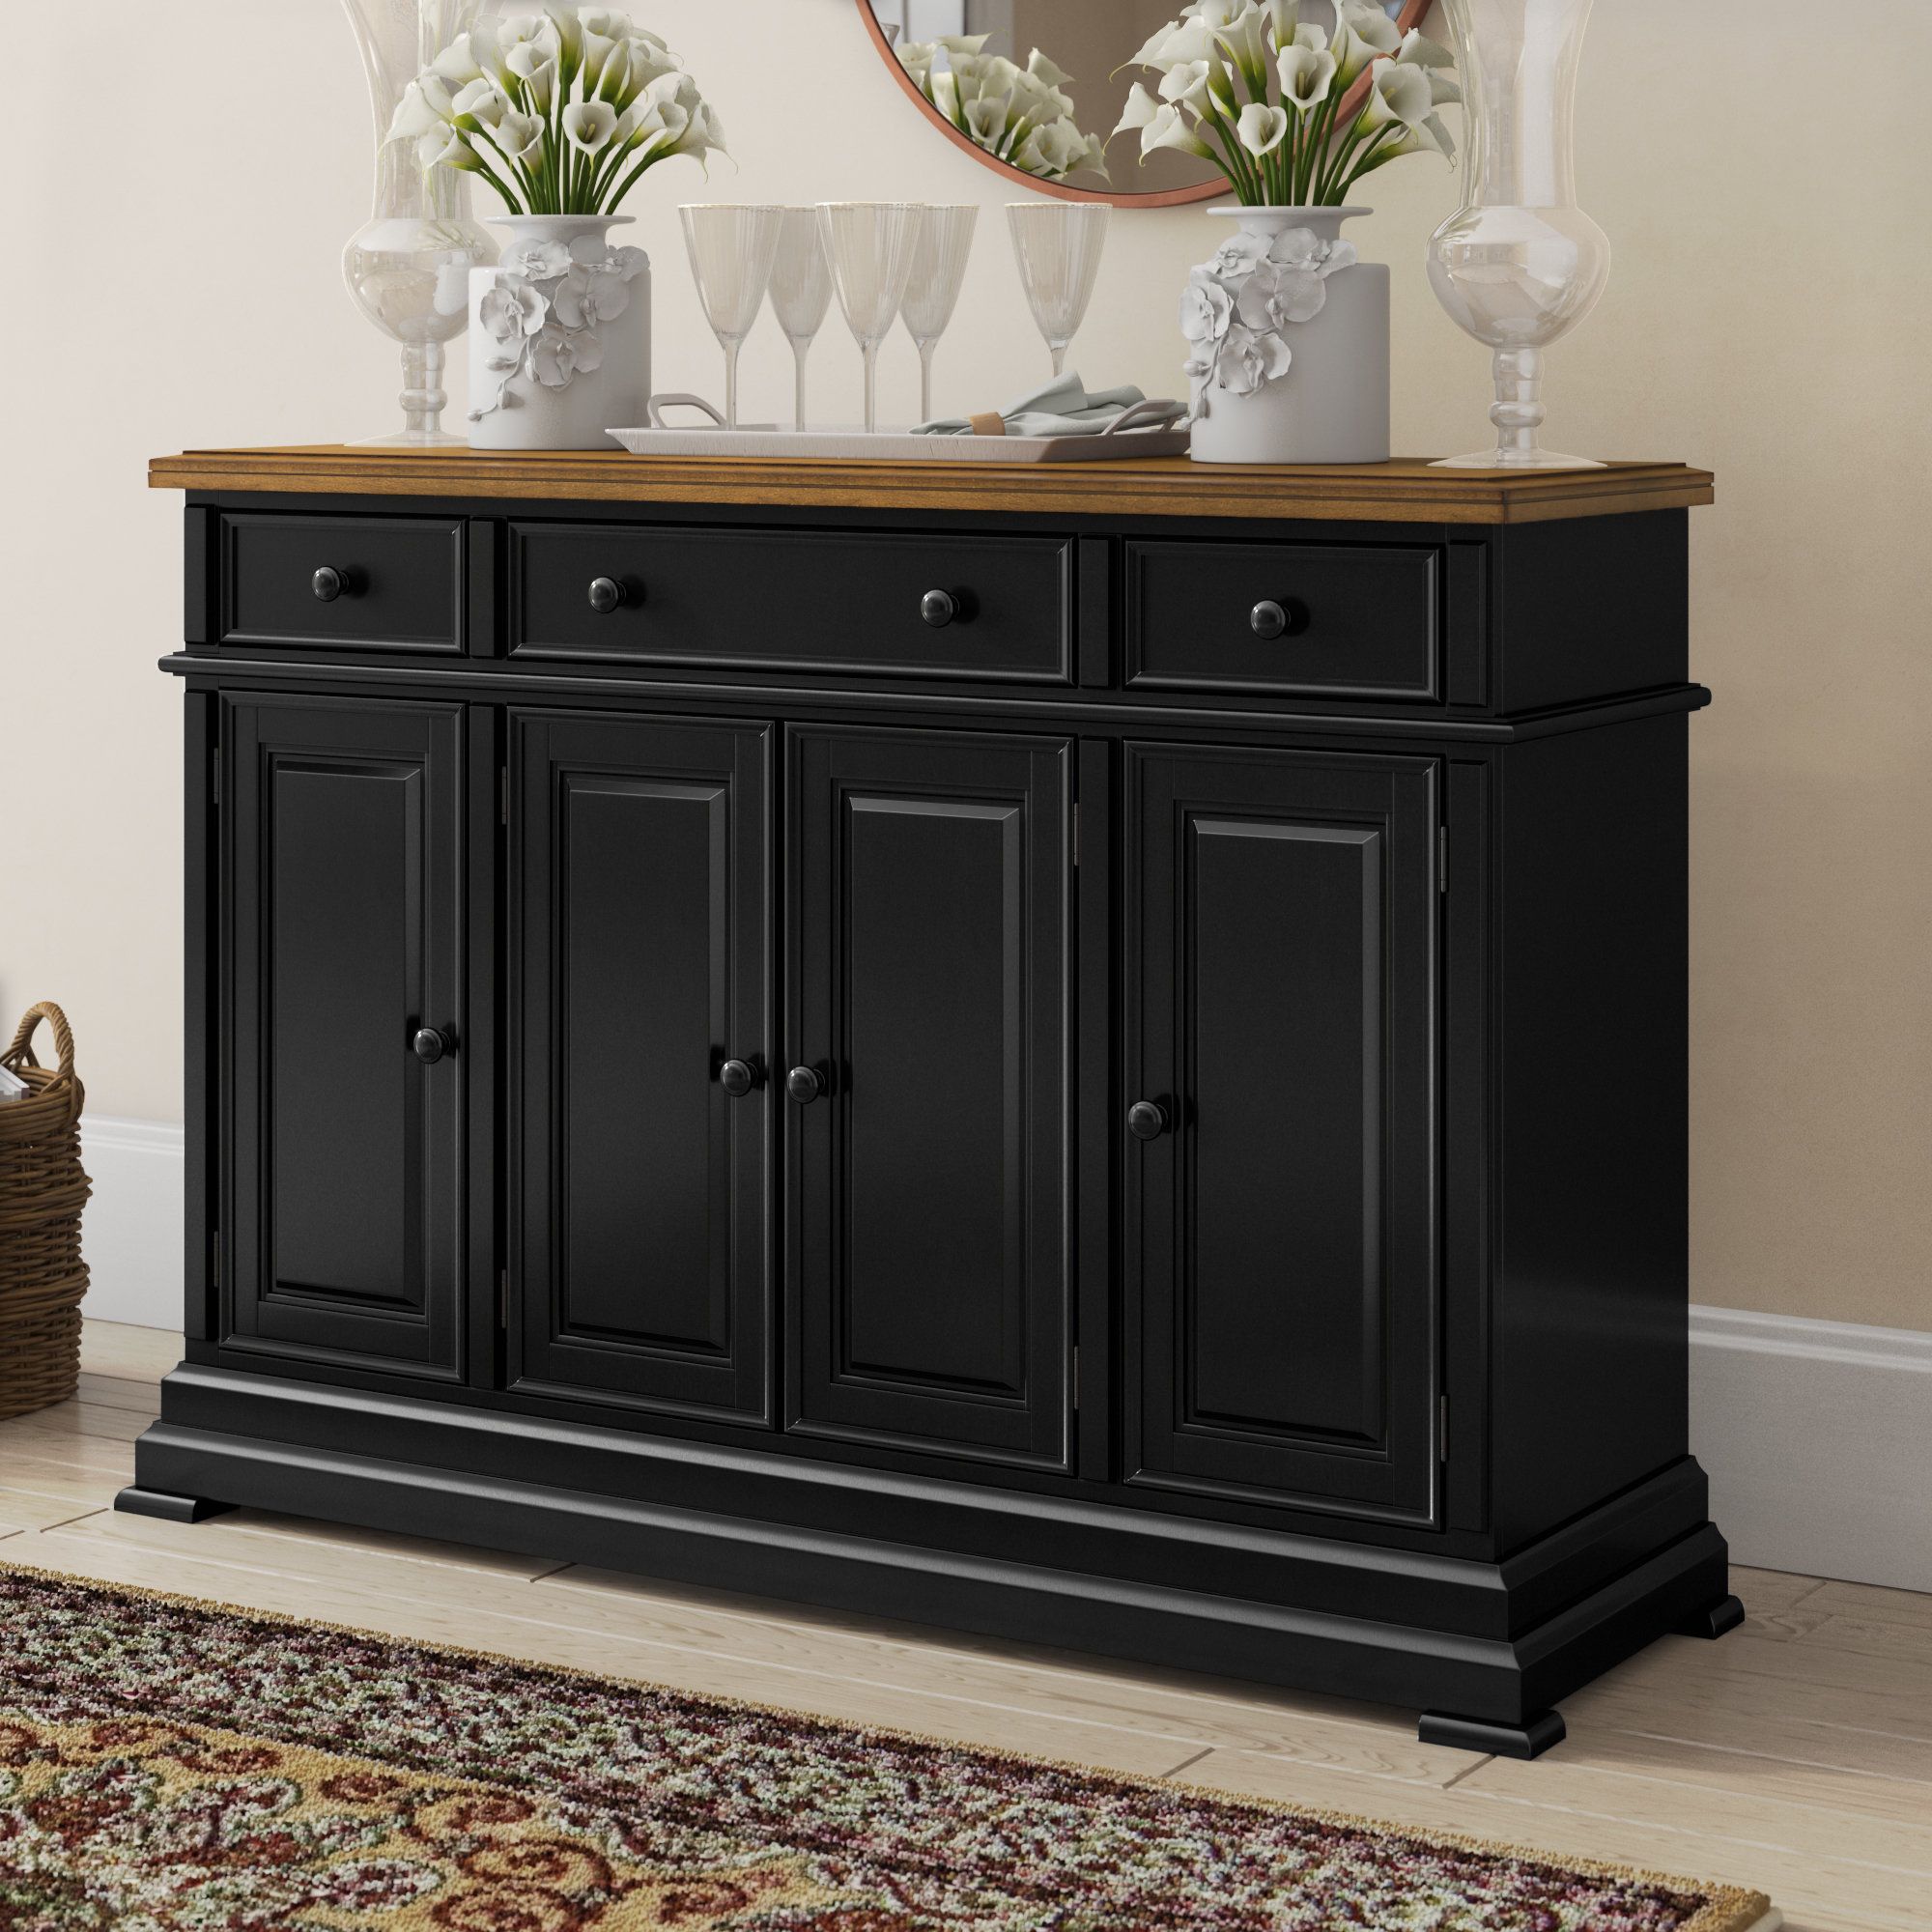 Three Posts Courtdale Sideboard | Wayfair With Regard To Courtdale Sideboards (Gallery 2 of 20)